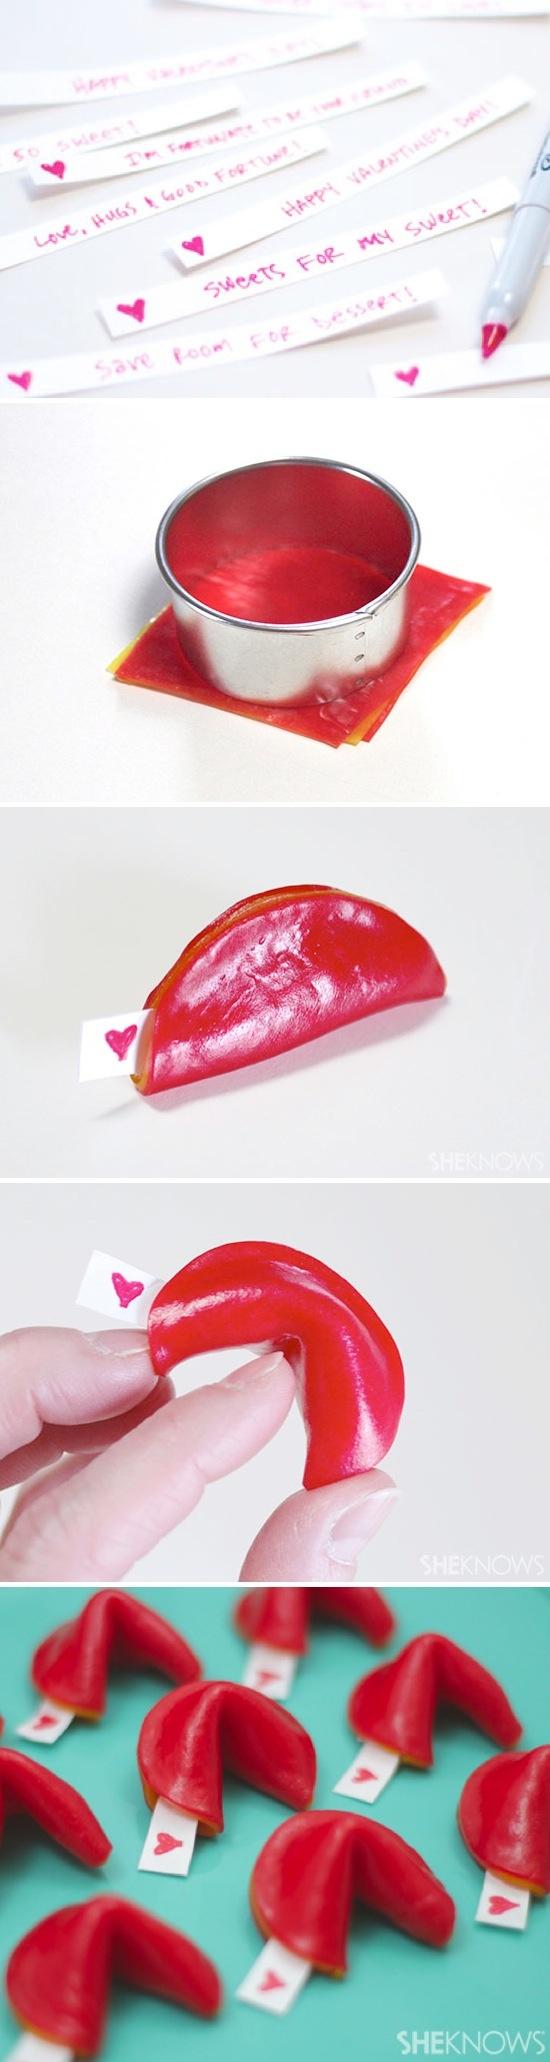 Wedding - Fruit Roll-Up Fortune Cookies 